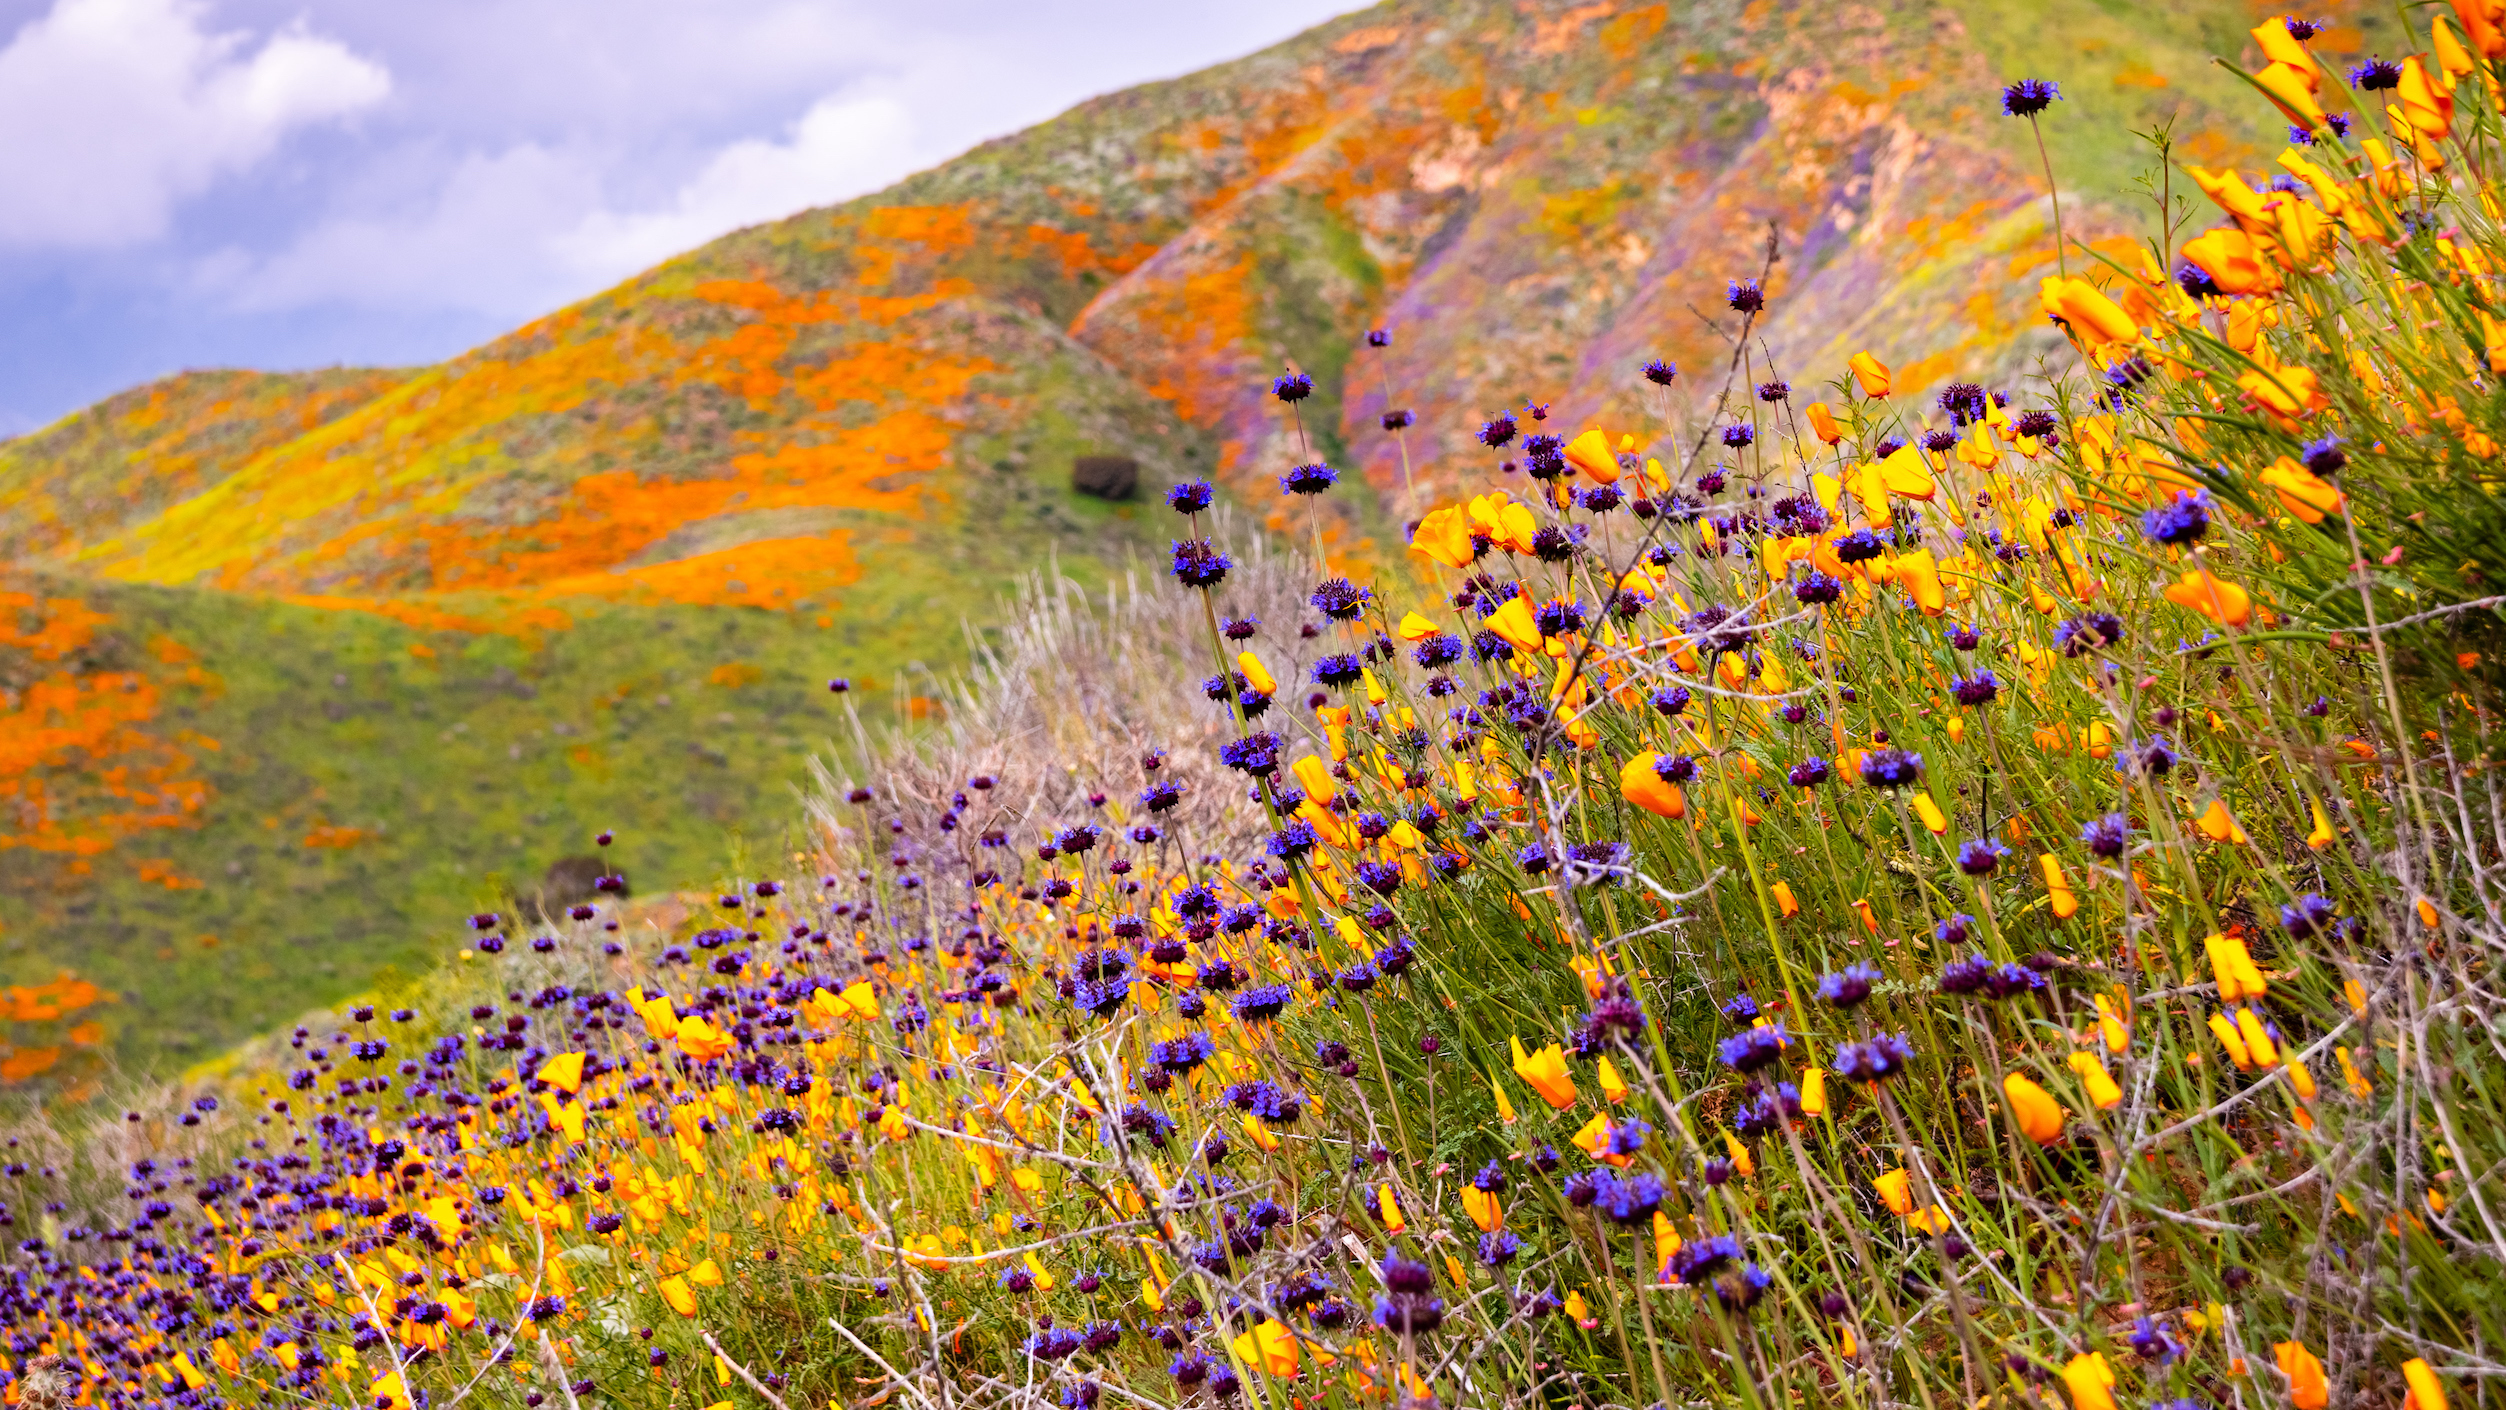 Lake Elsinor superbloom takes over the canyon in oranges and purples